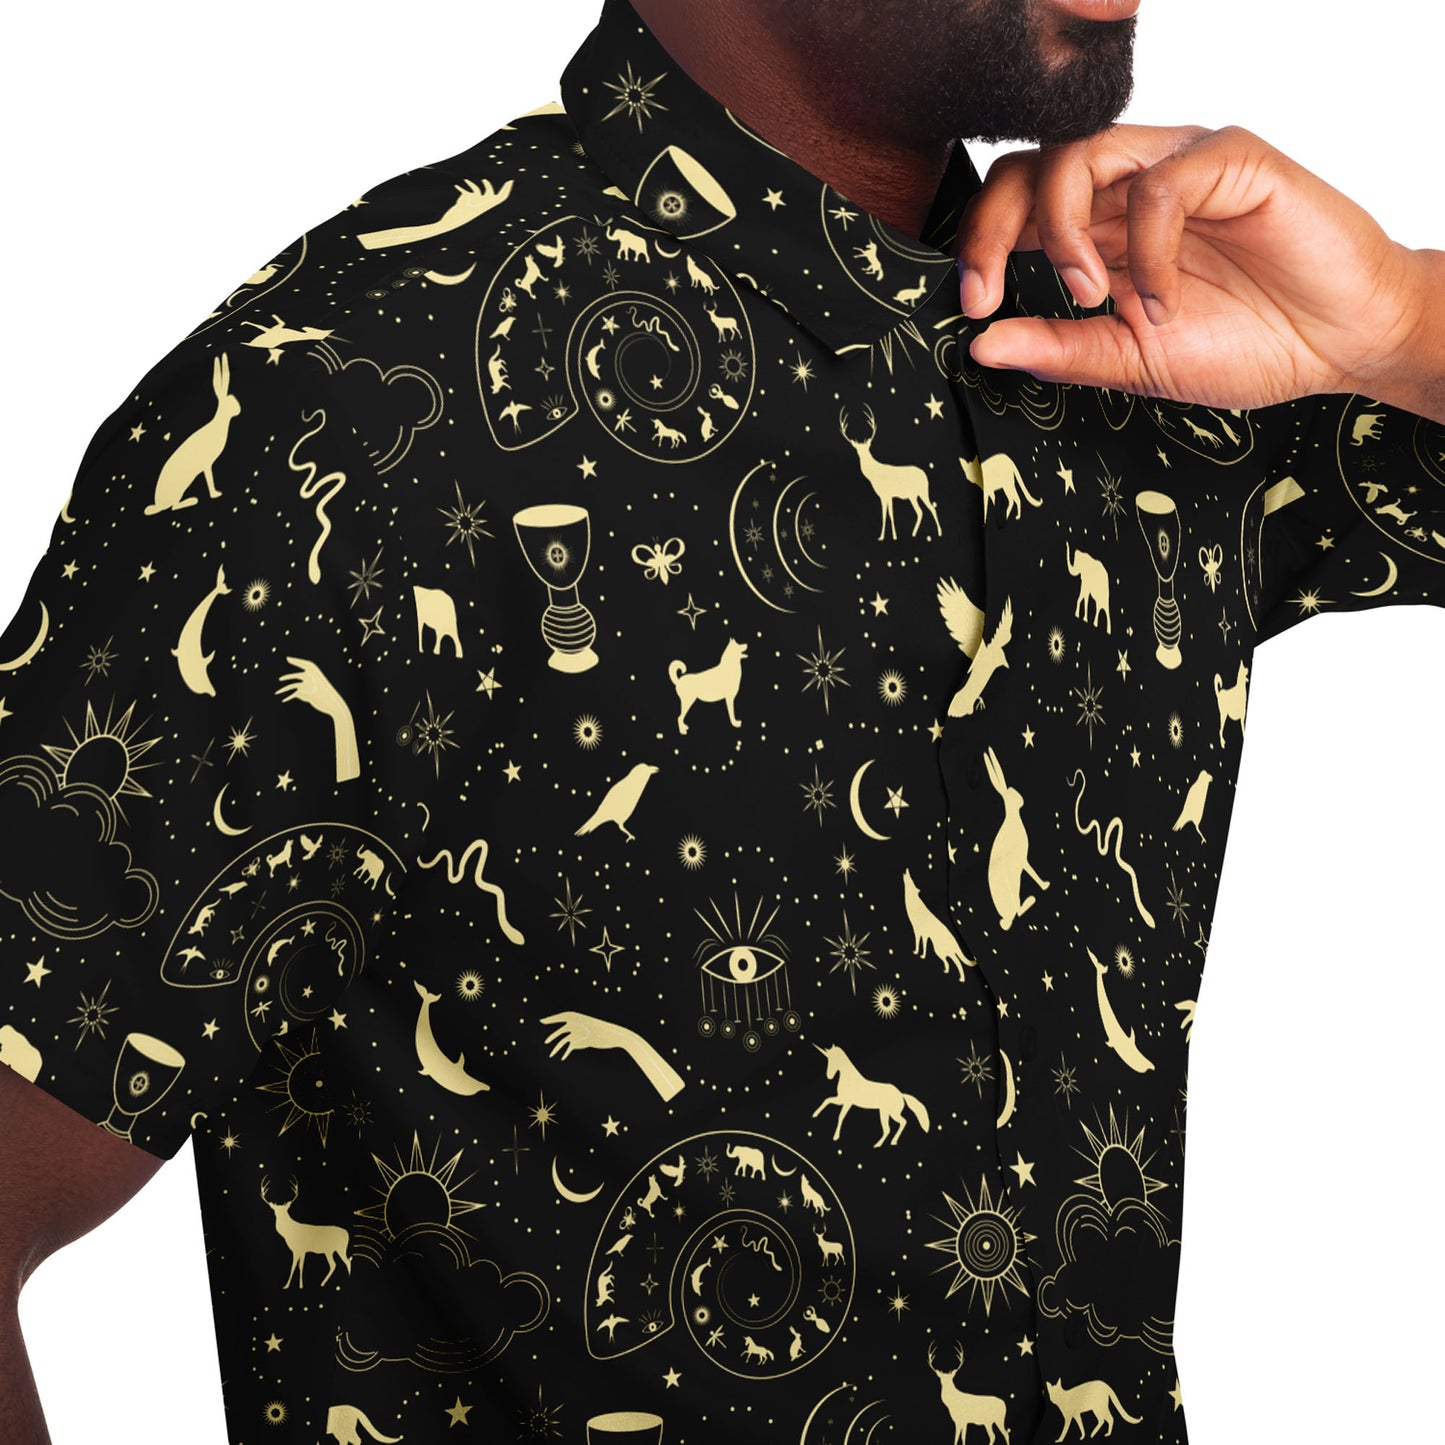 The magic is within us short sleeve button down shirt